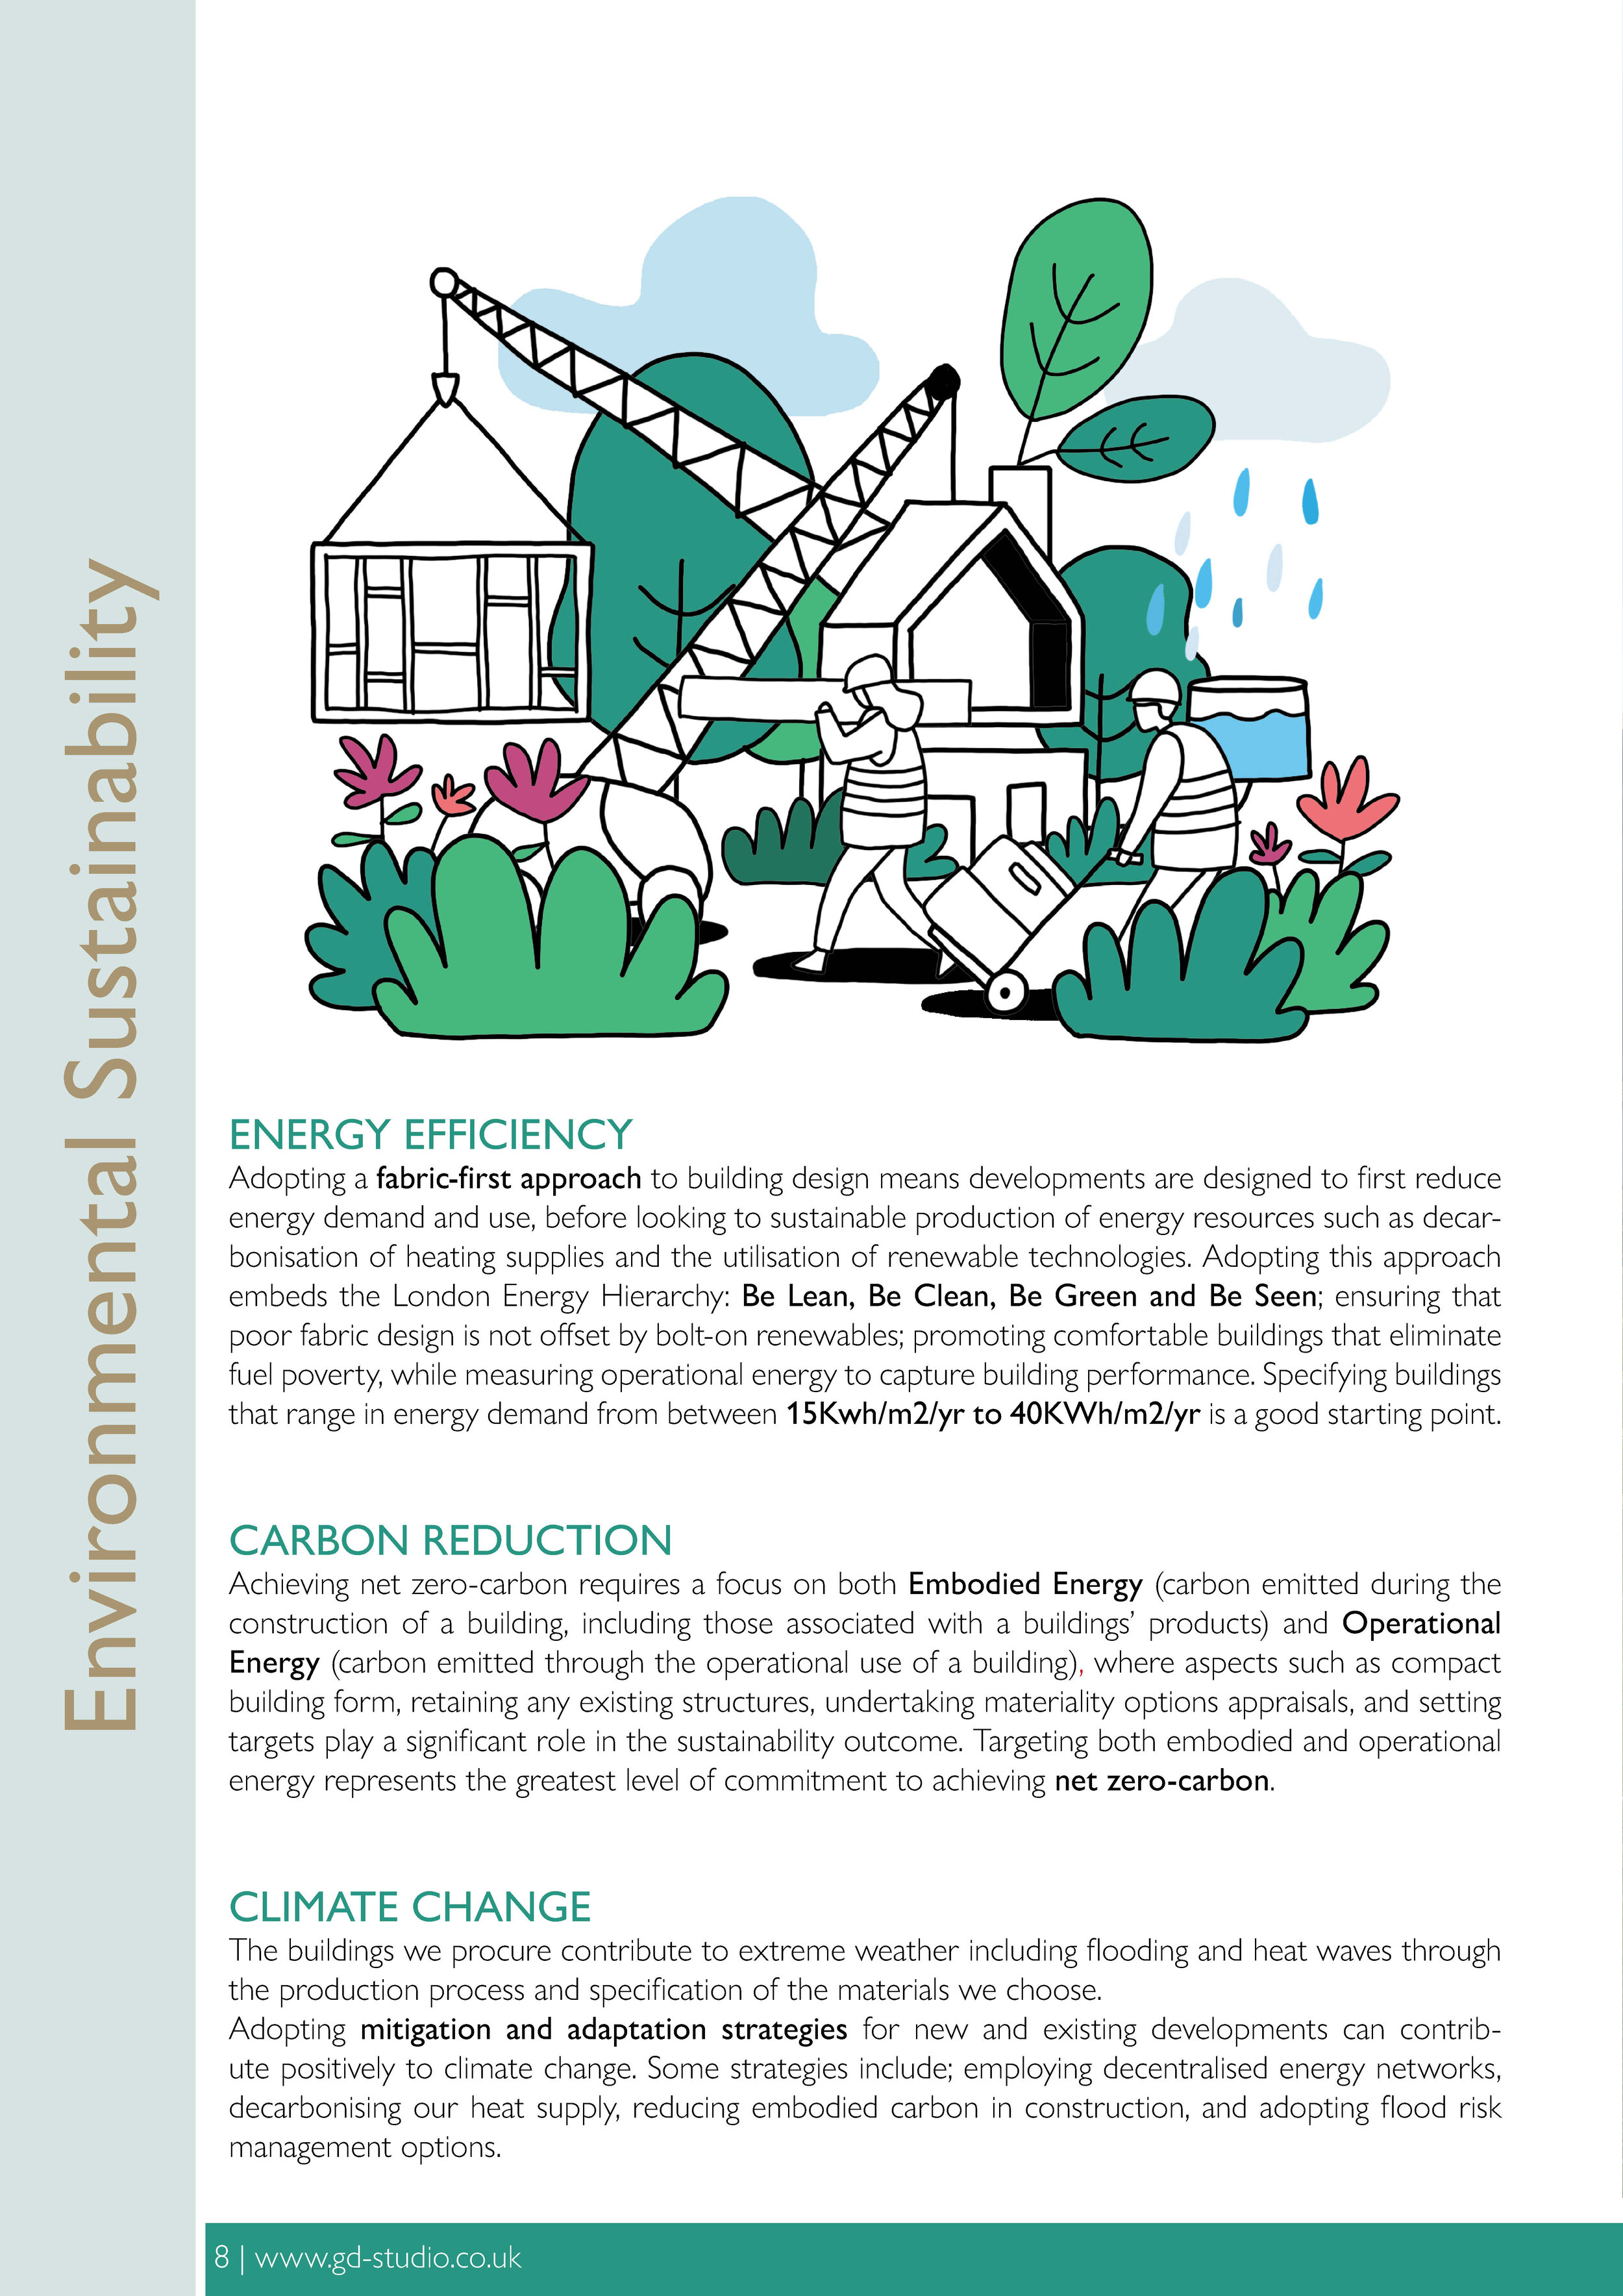 GDS Clients Guide to Sustainability-8.jpg